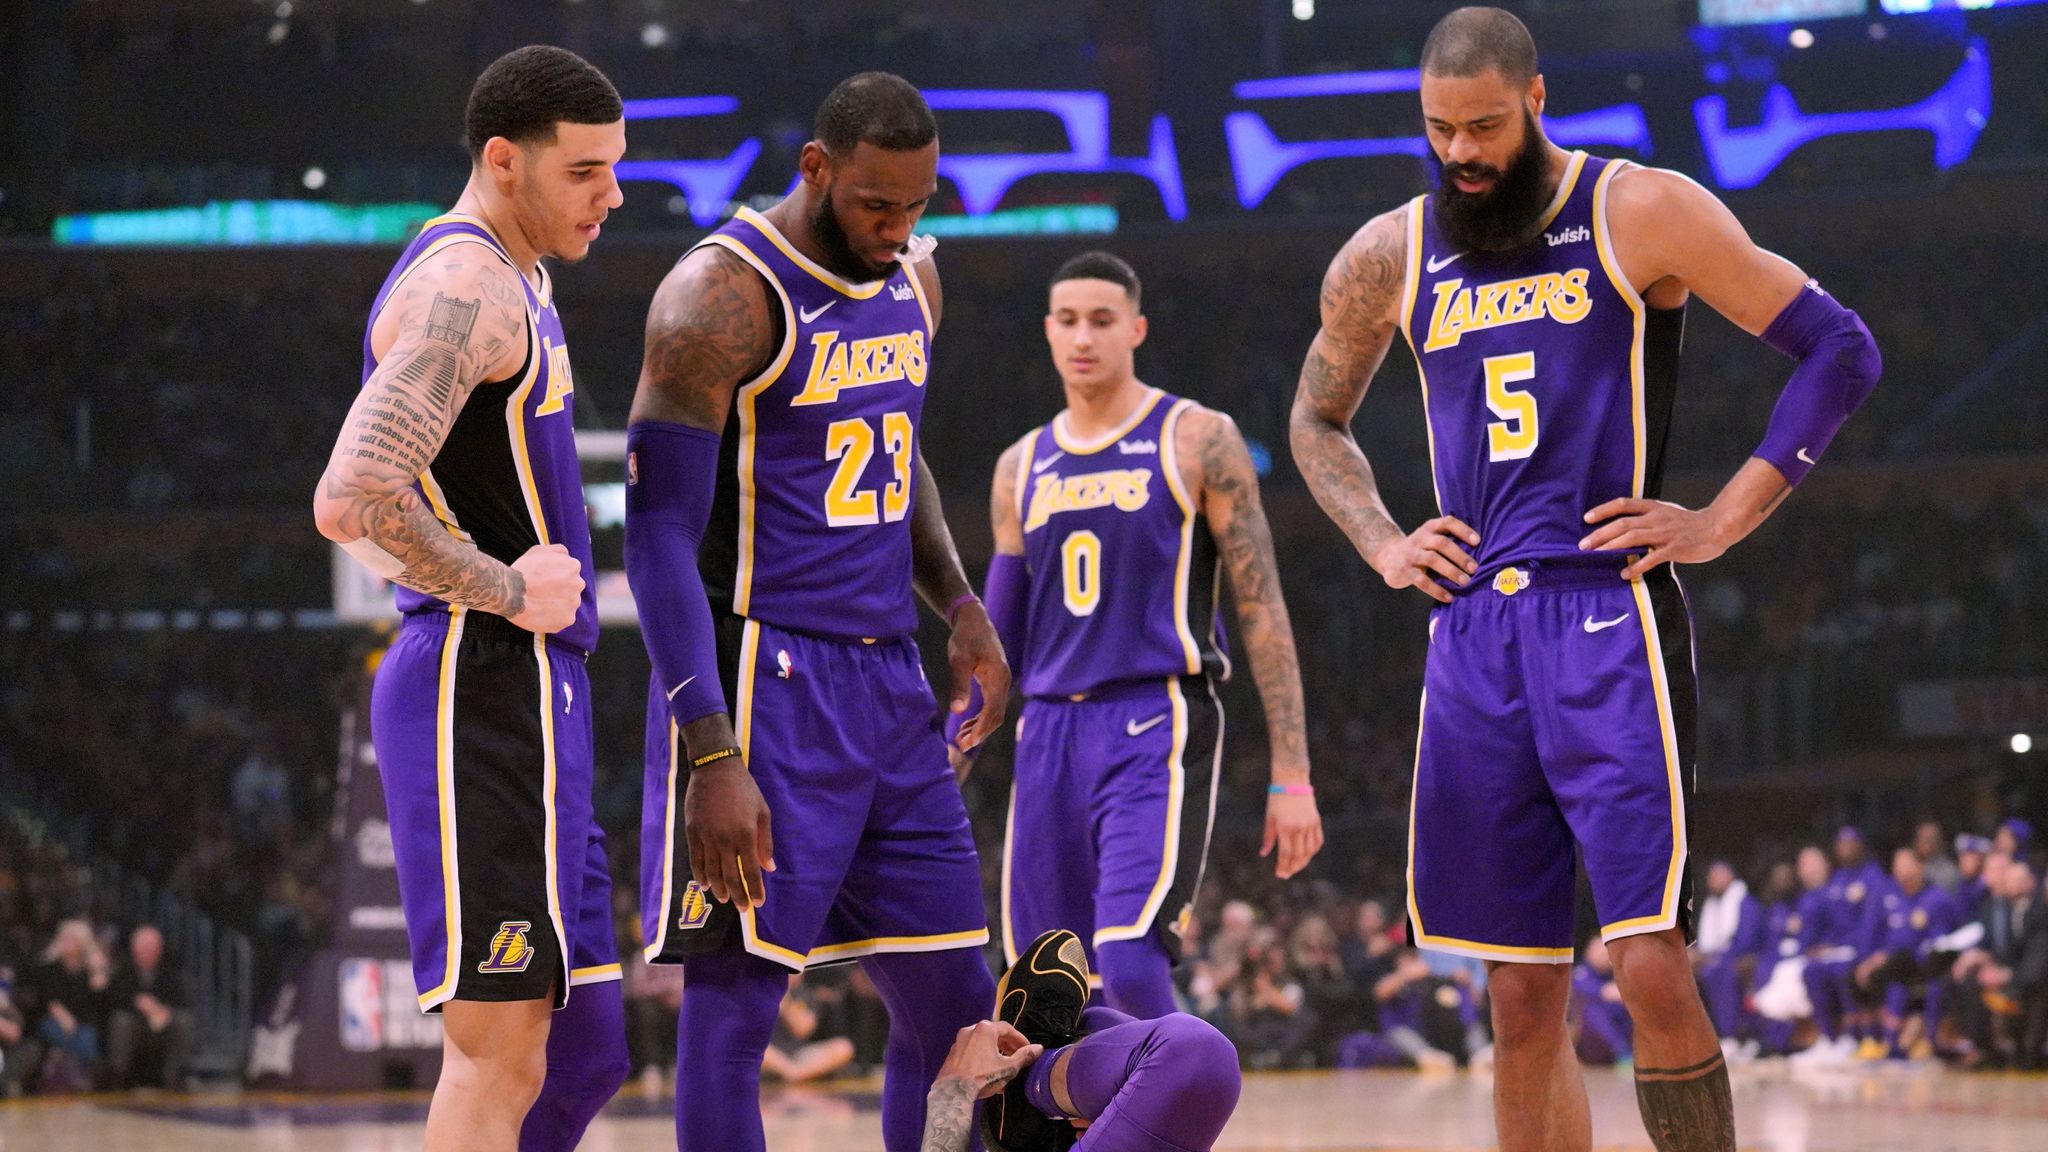 Los Angeles Lakers on X: OFFICIAL: The Lakers have exercised team